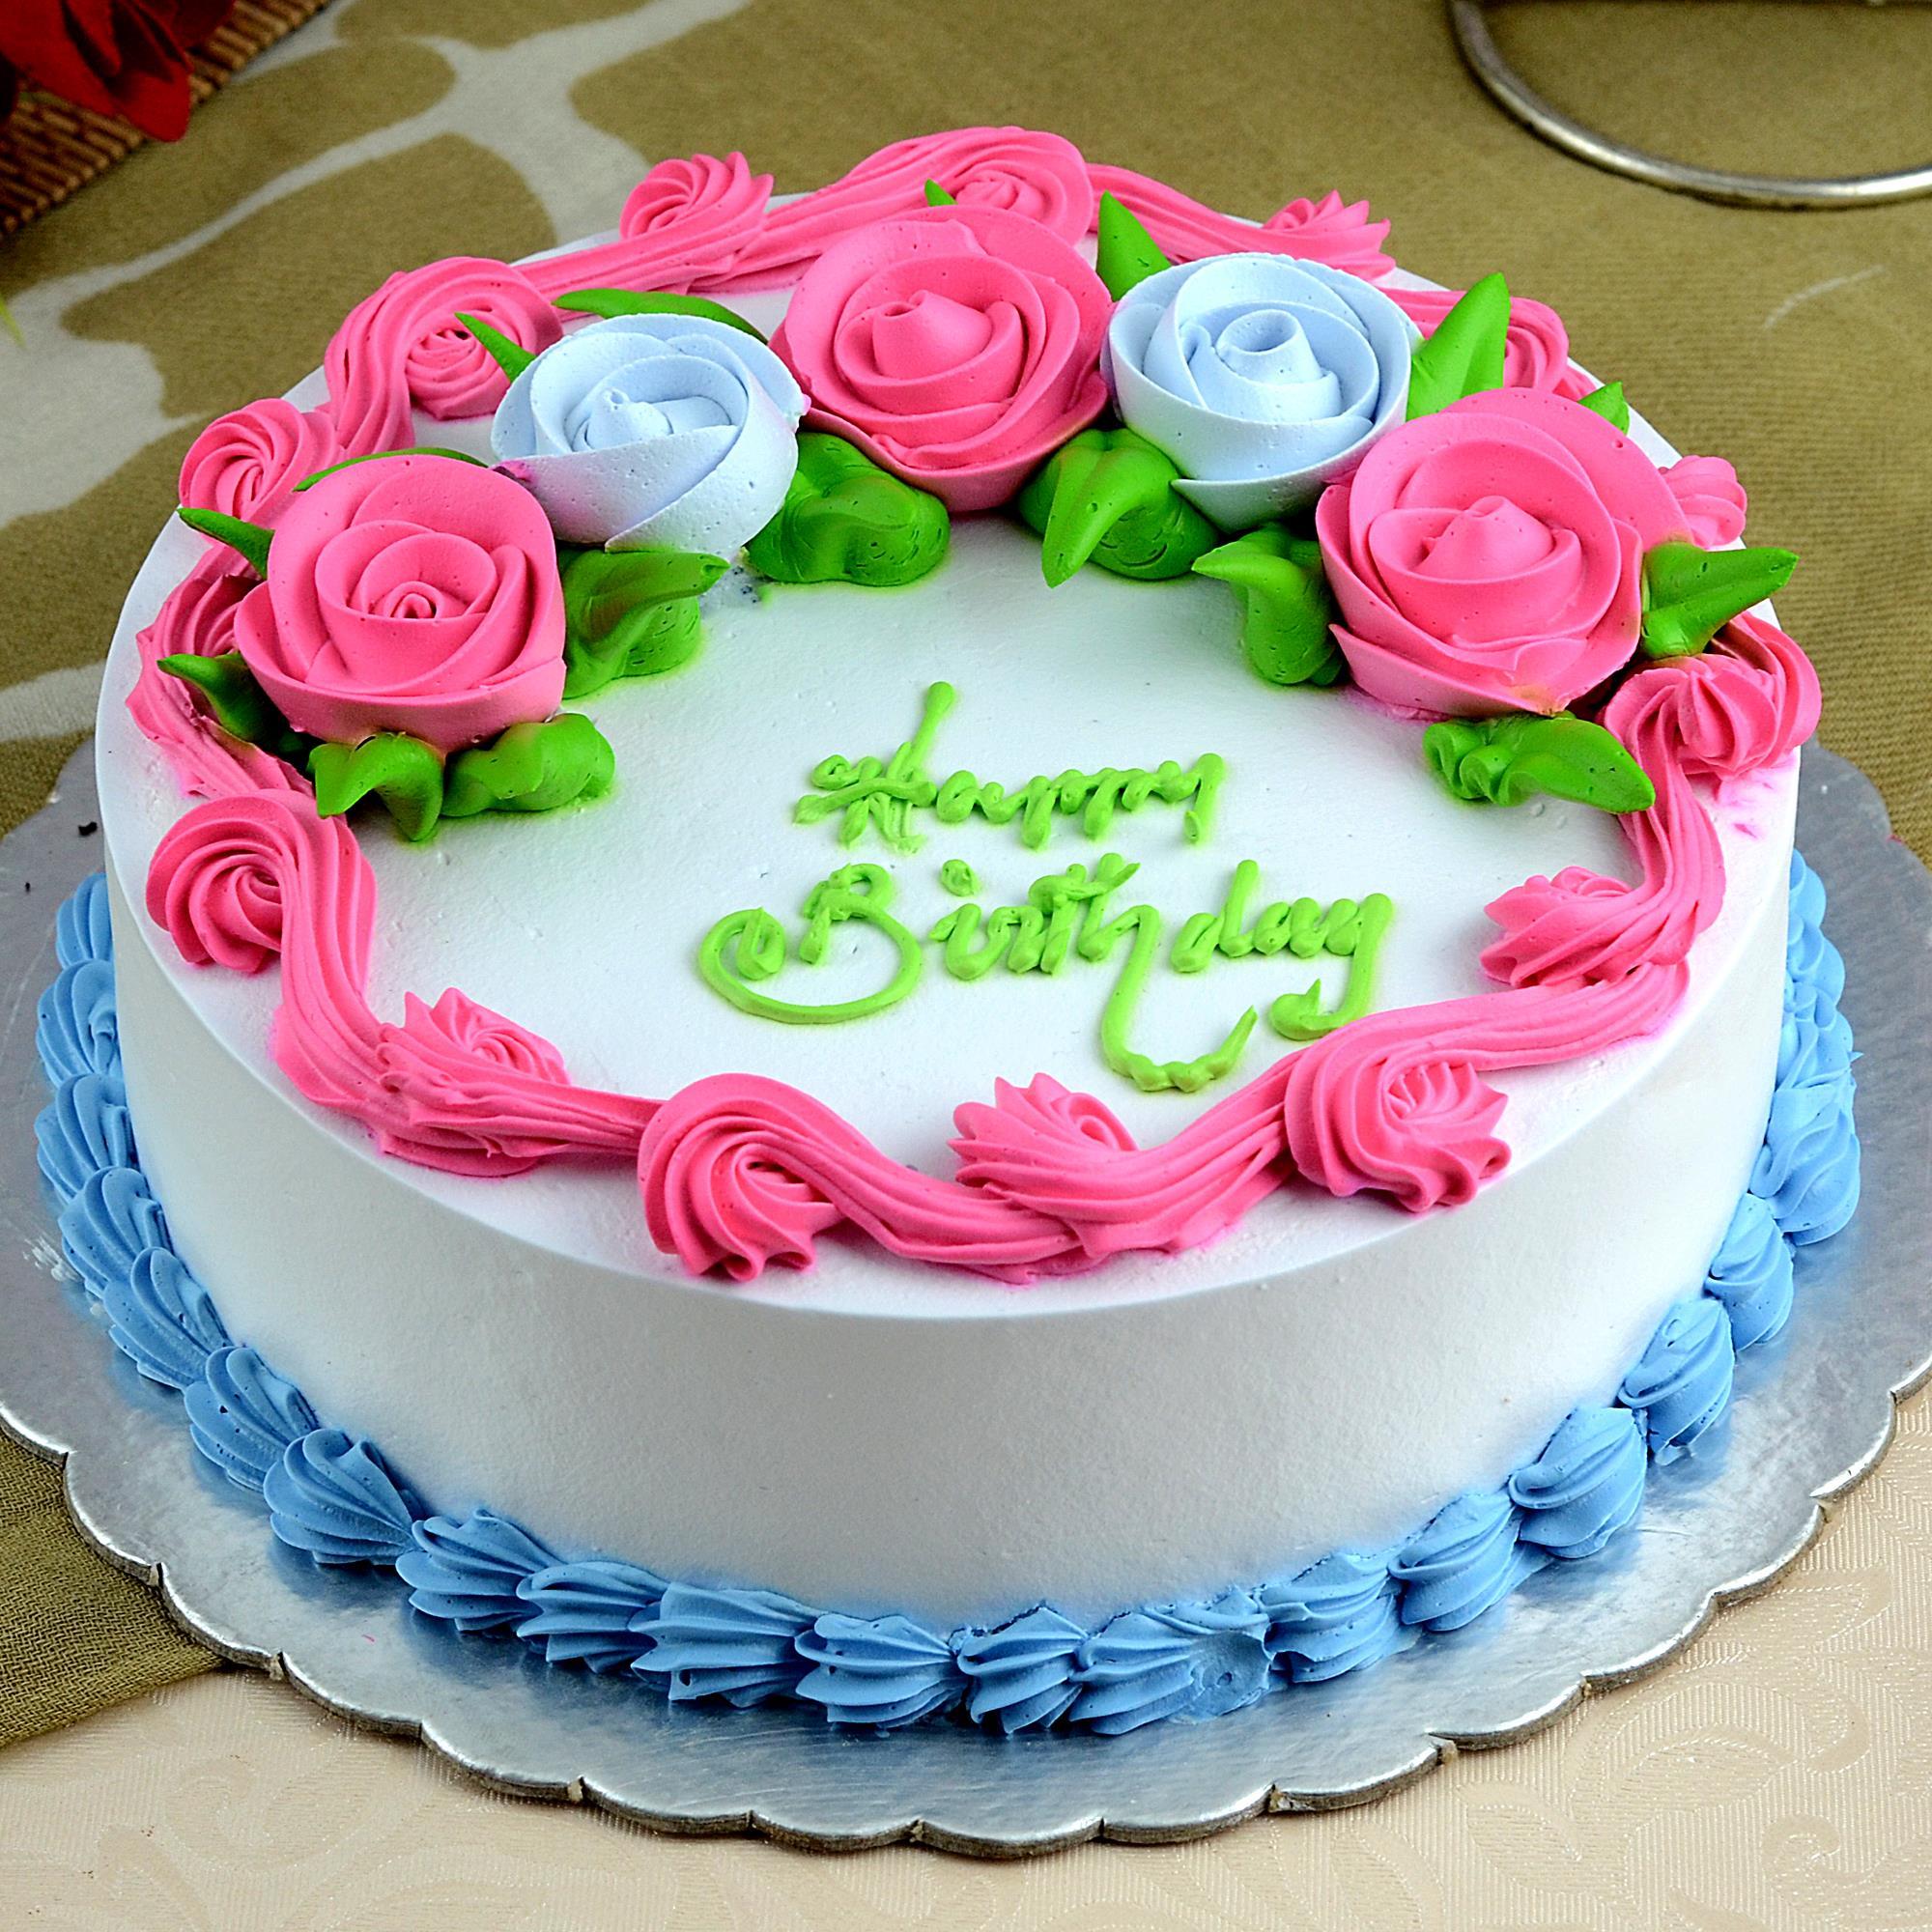 Fashion Designer Theme Customized Cake Delivery in Delhi NCR - ₹2,349.00  Cake Express